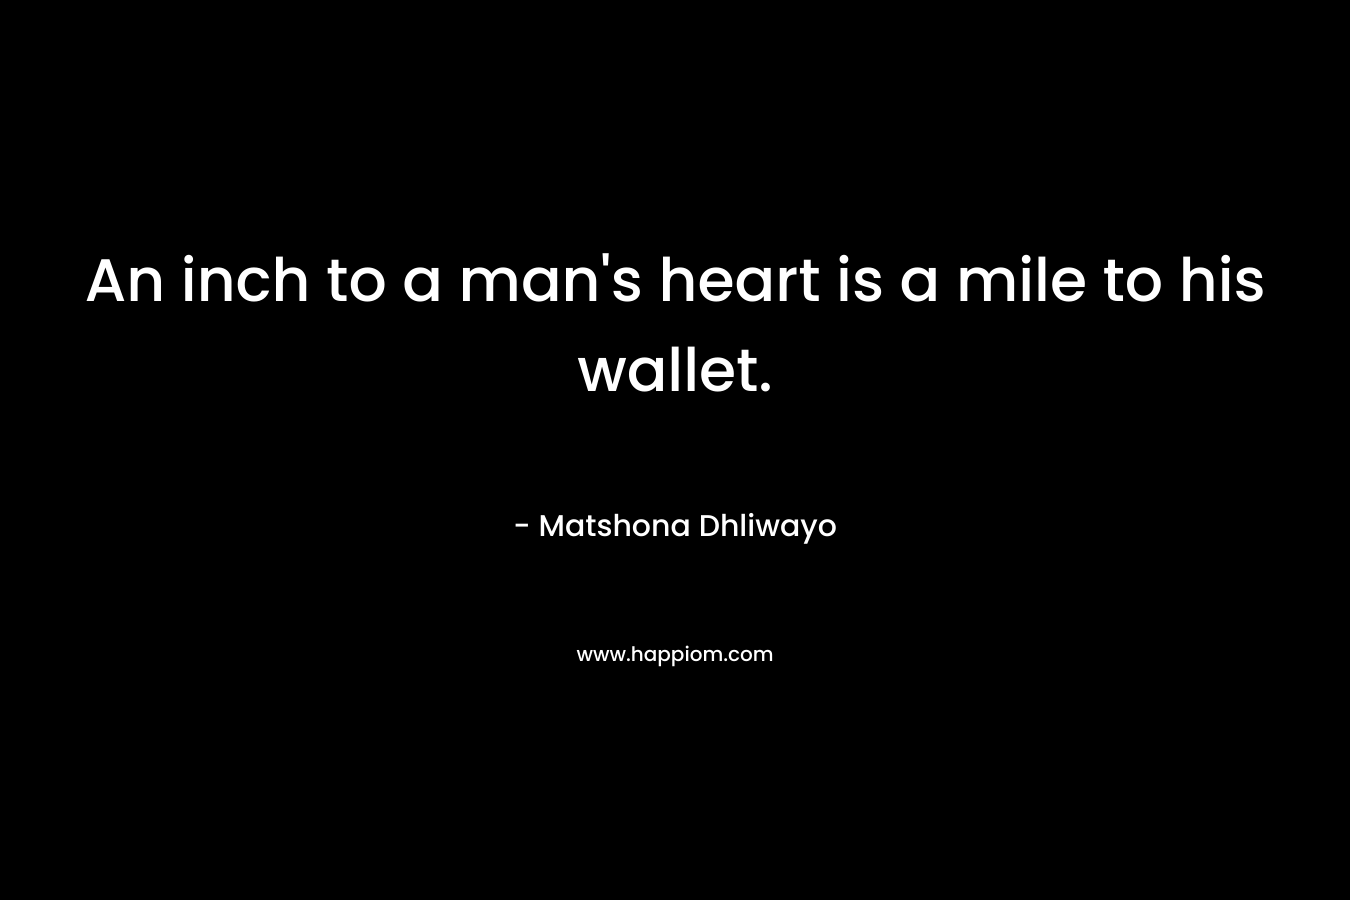 An inch to a man's heart is a mile to his wallet.